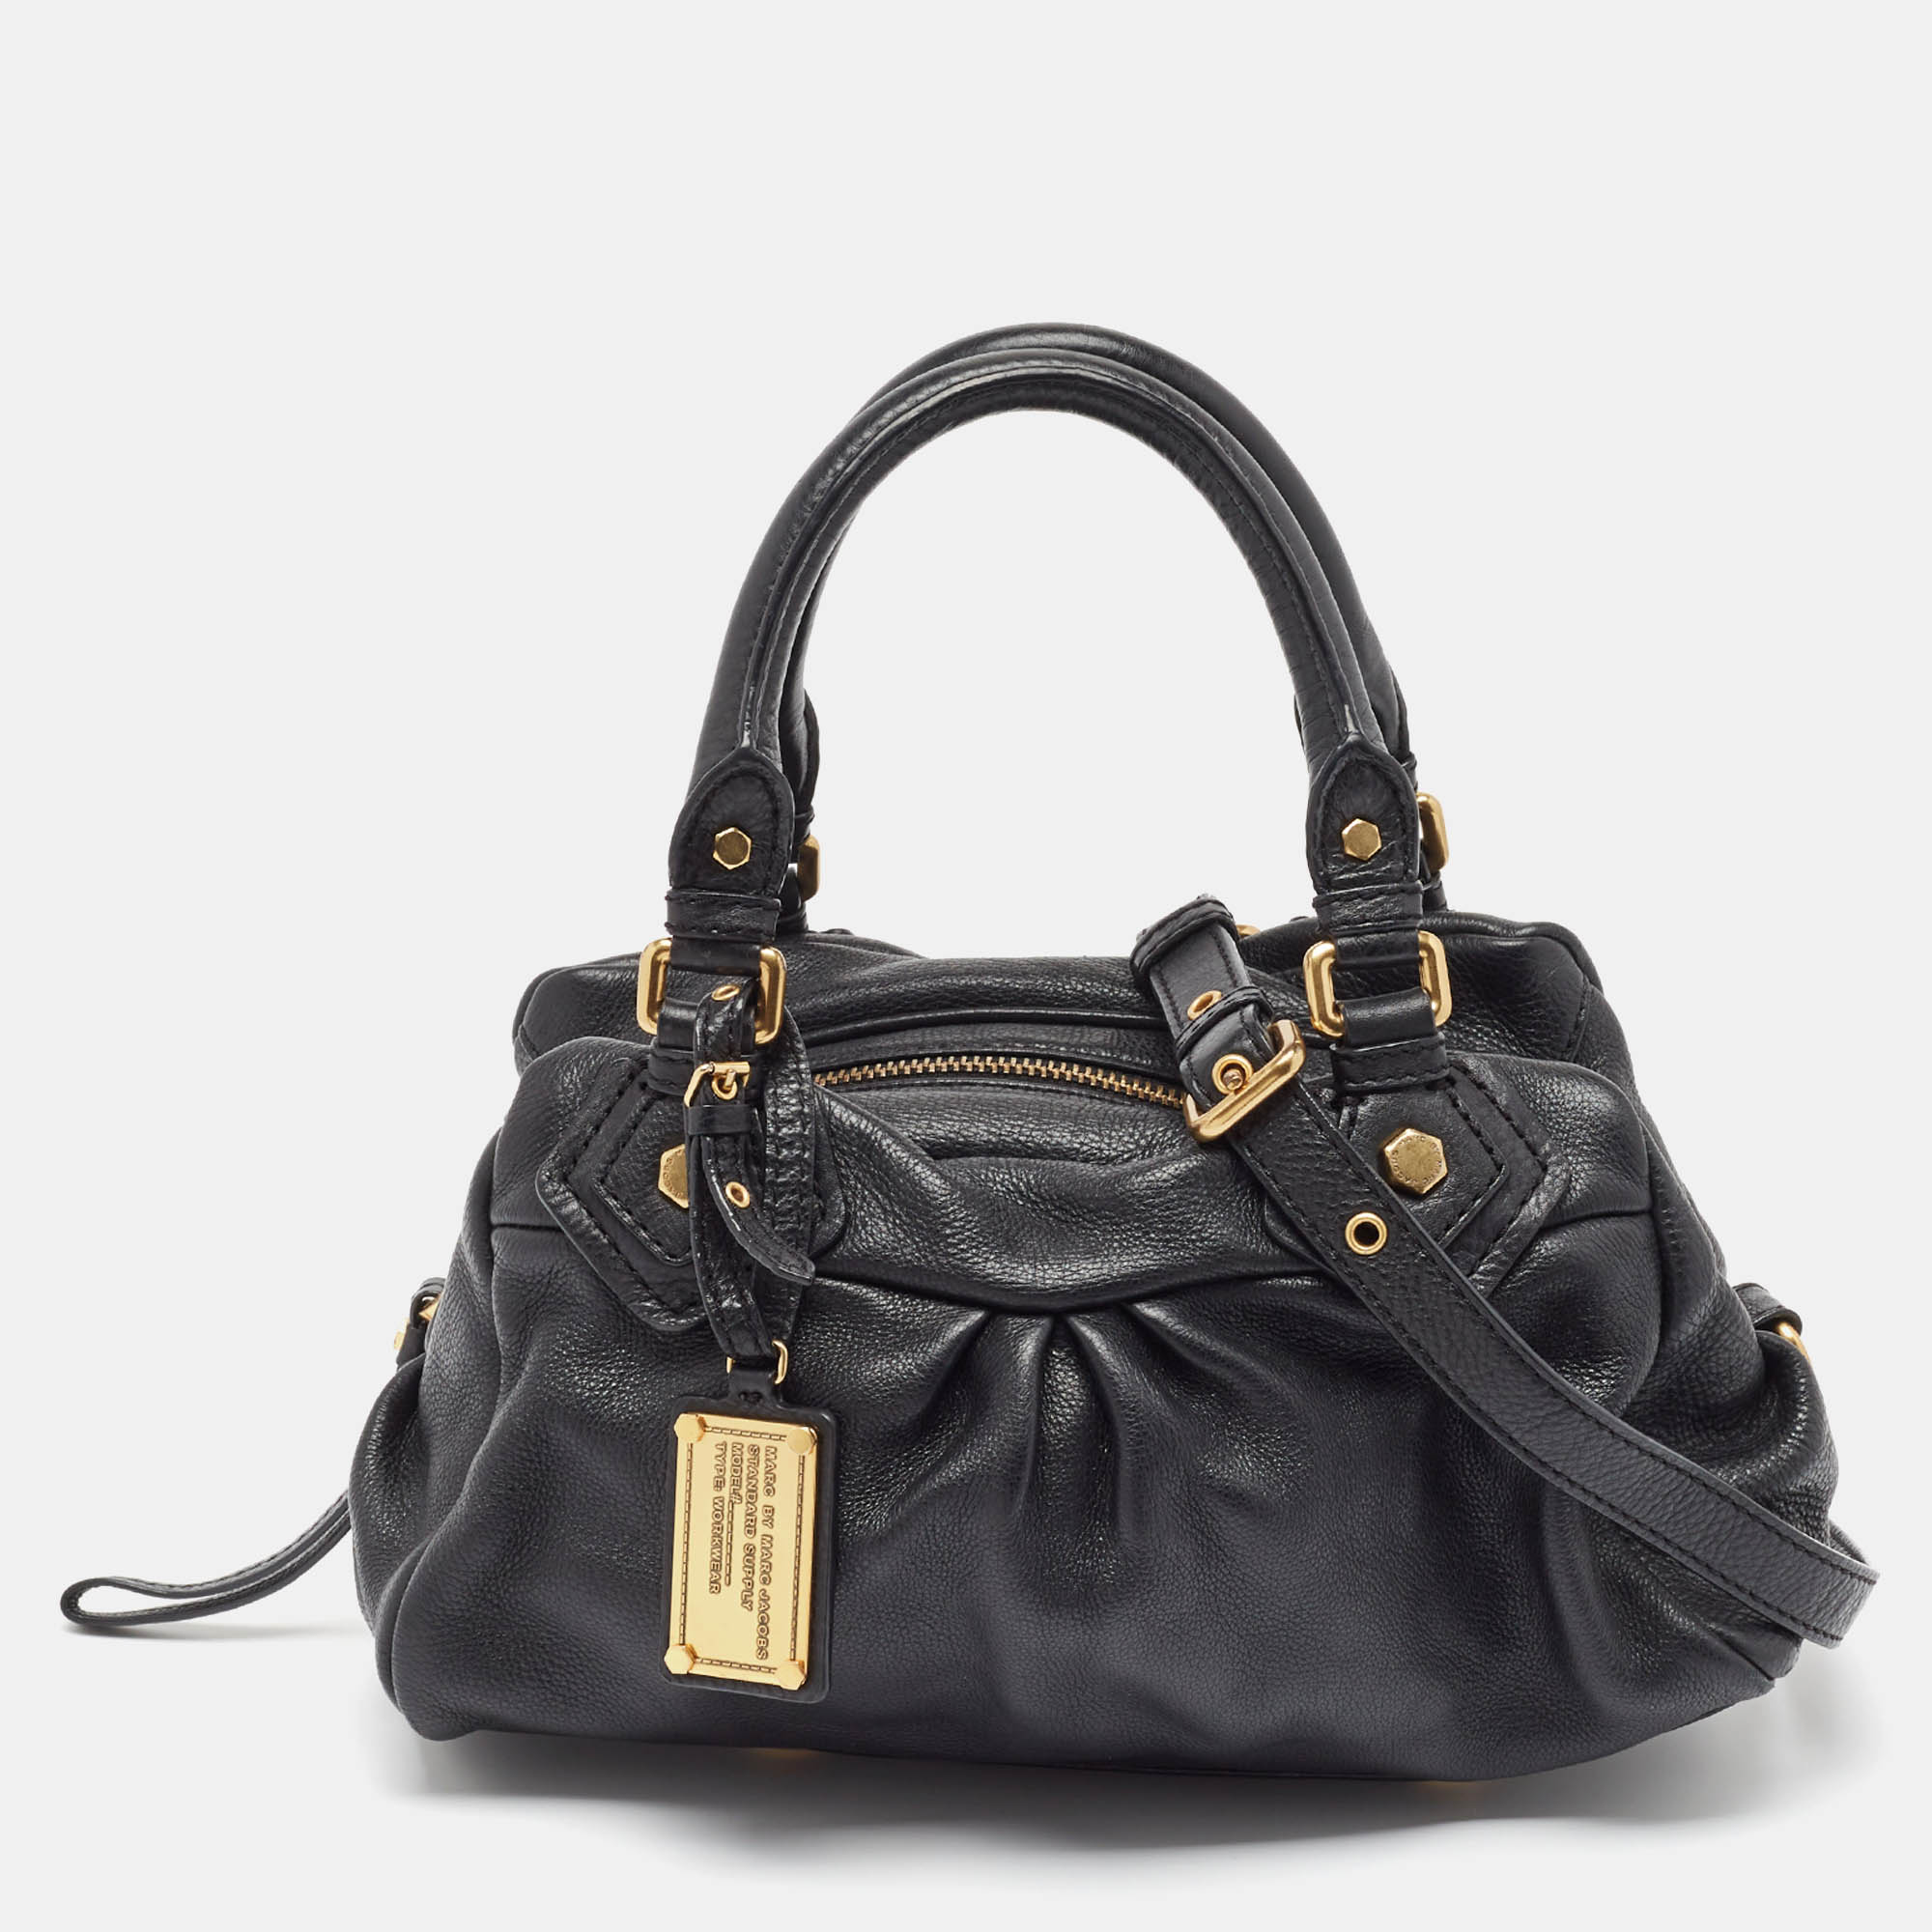 

Marc by Marc Jacobs Black Leather Classic Q Groovee Satchel